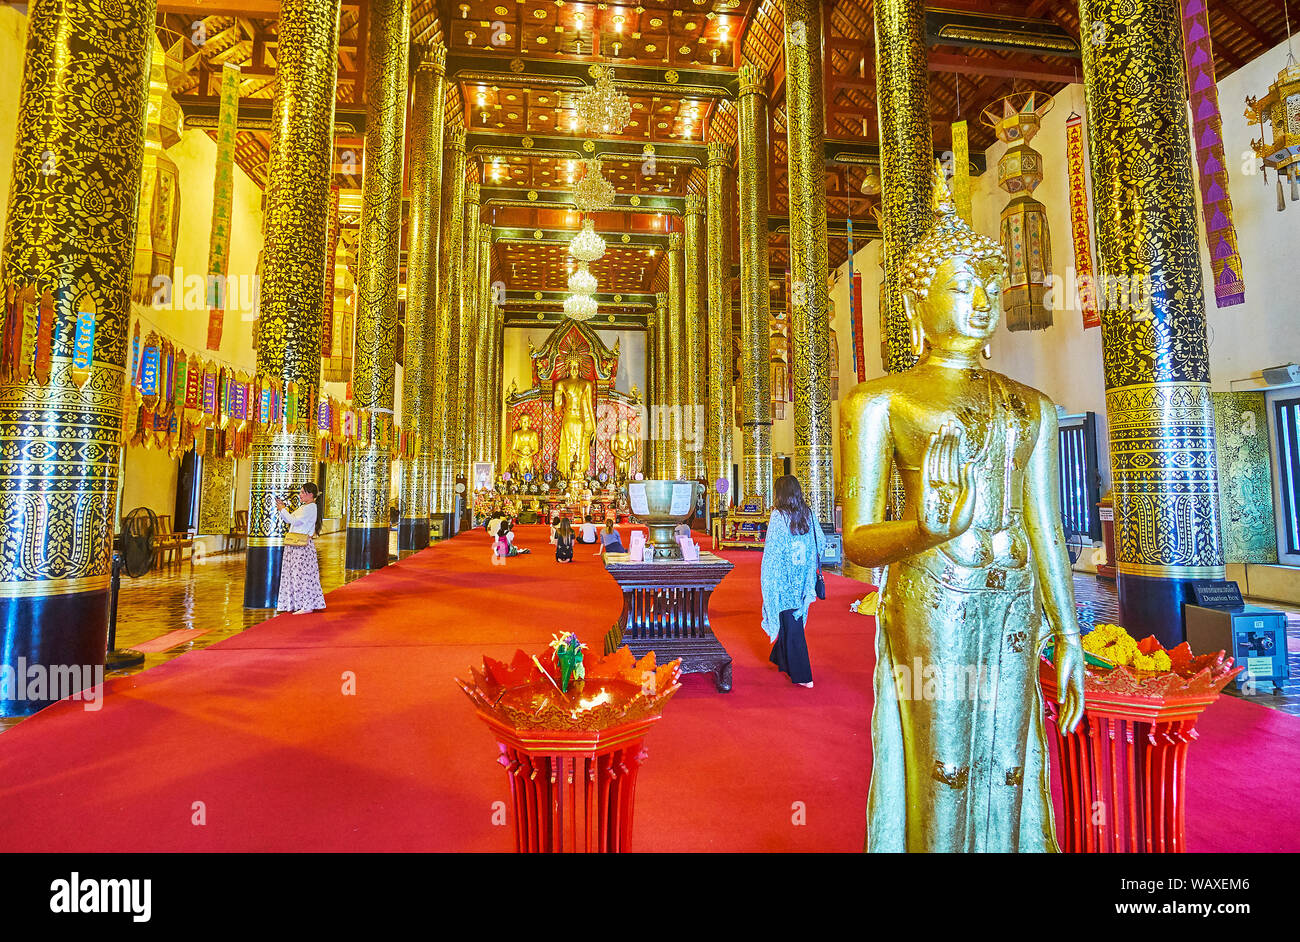 CHIANG MAI, THAILAND - MAY 2, 2019: Splendid interior of Phra Viharn Luang of Wat Chedi Luang complex with golden Buddha images and tall columns, cove Stock Photo